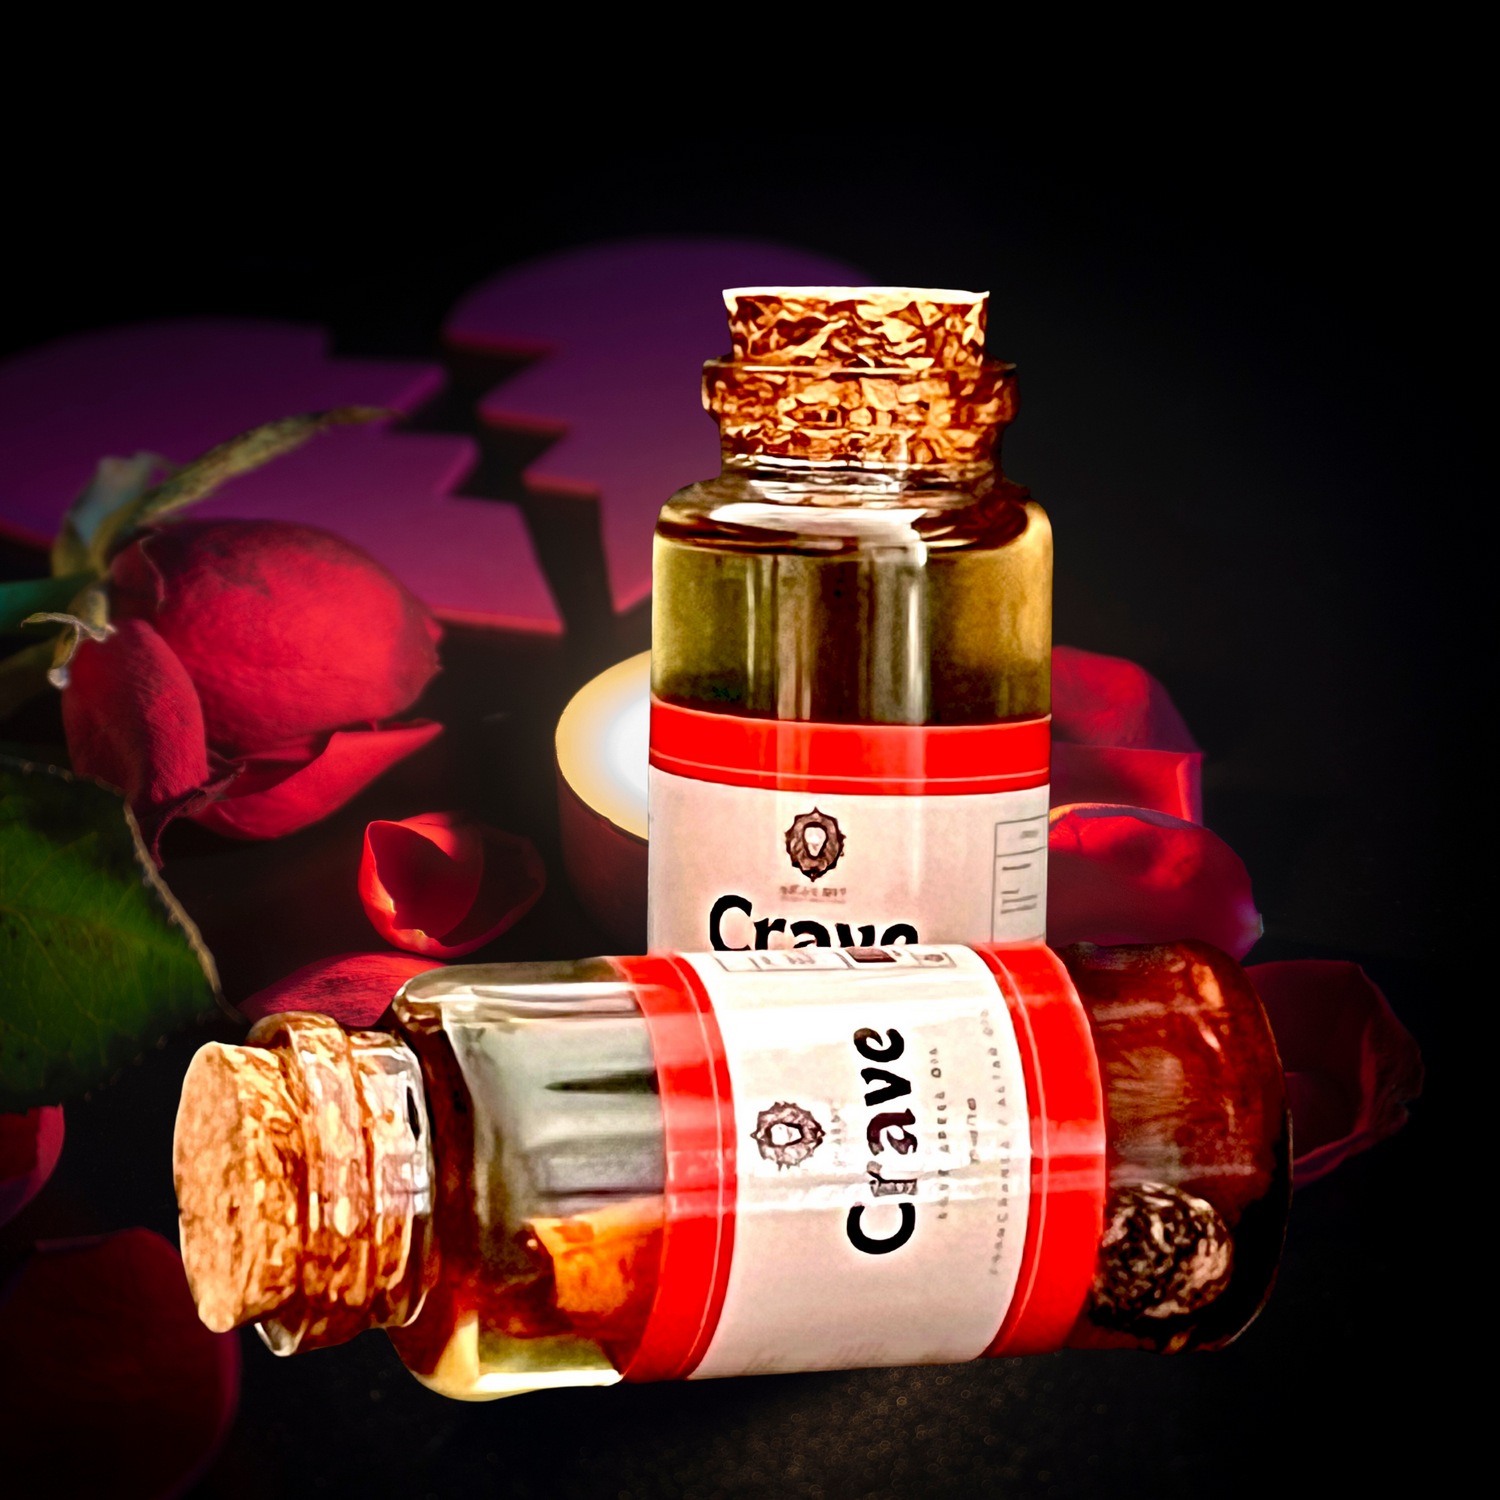 Alchemy7 | Unleash Irresistible Love with our Crave Oil - Ignite Your Passion! 🔥❤️